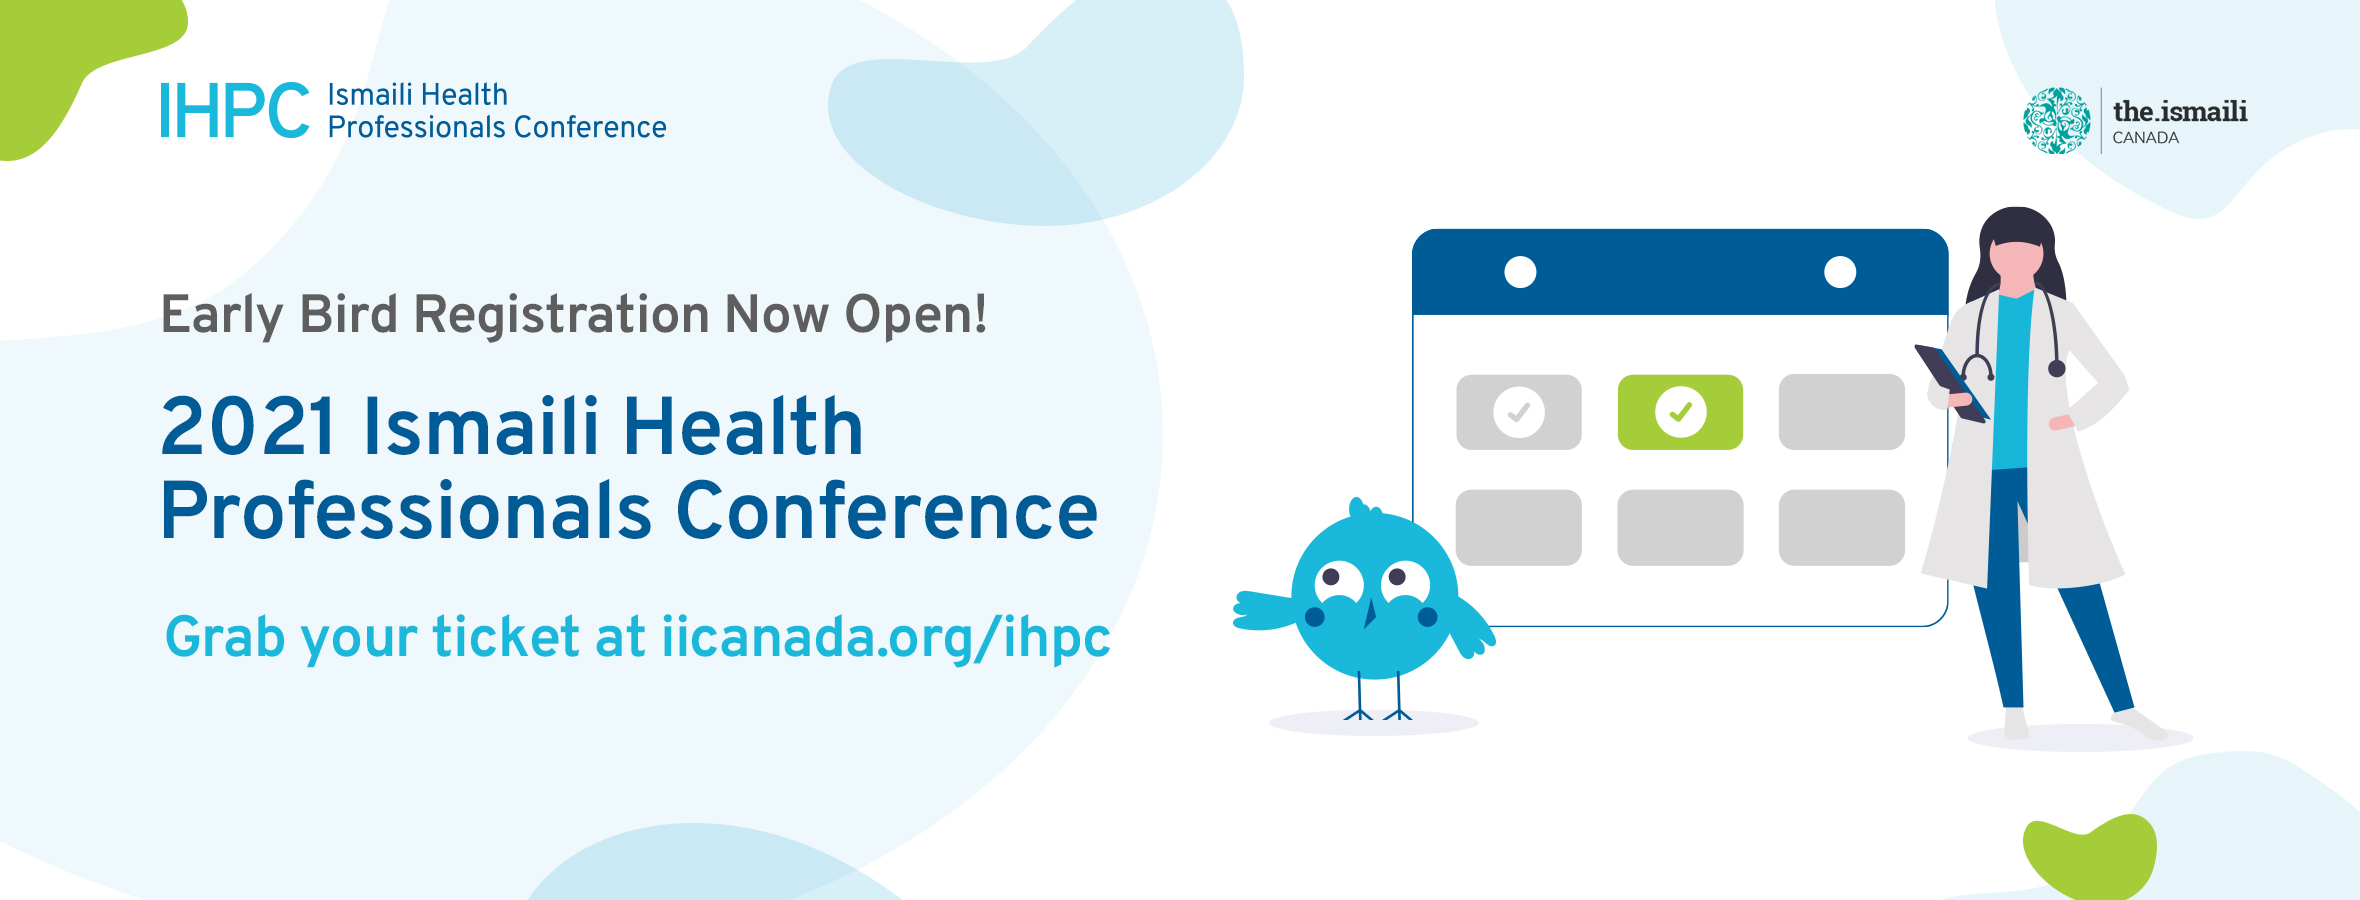 IHP Conference 2021: Early Bird Registration Now Open!